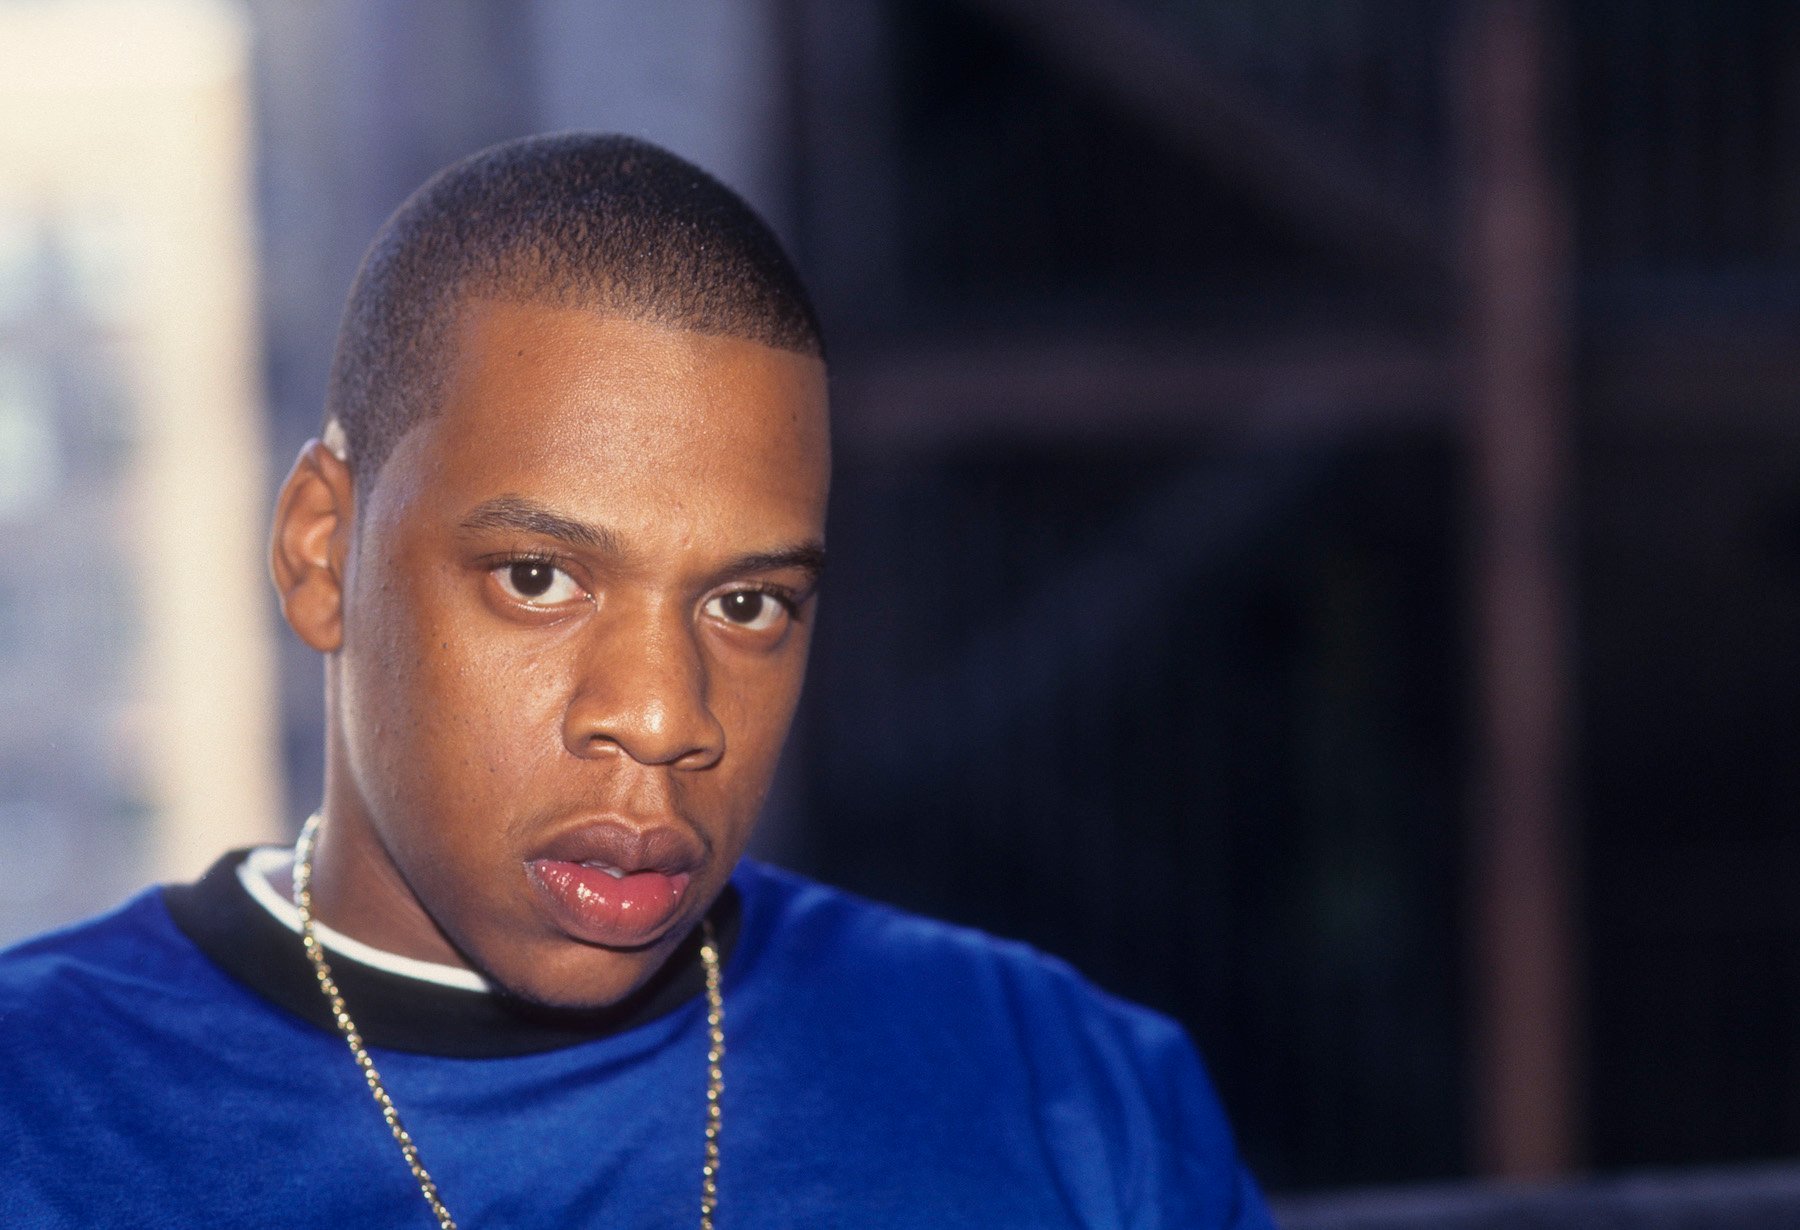 Jay-Z, who was once friends with Biggie Smalls, pictured wearing blue in 1996